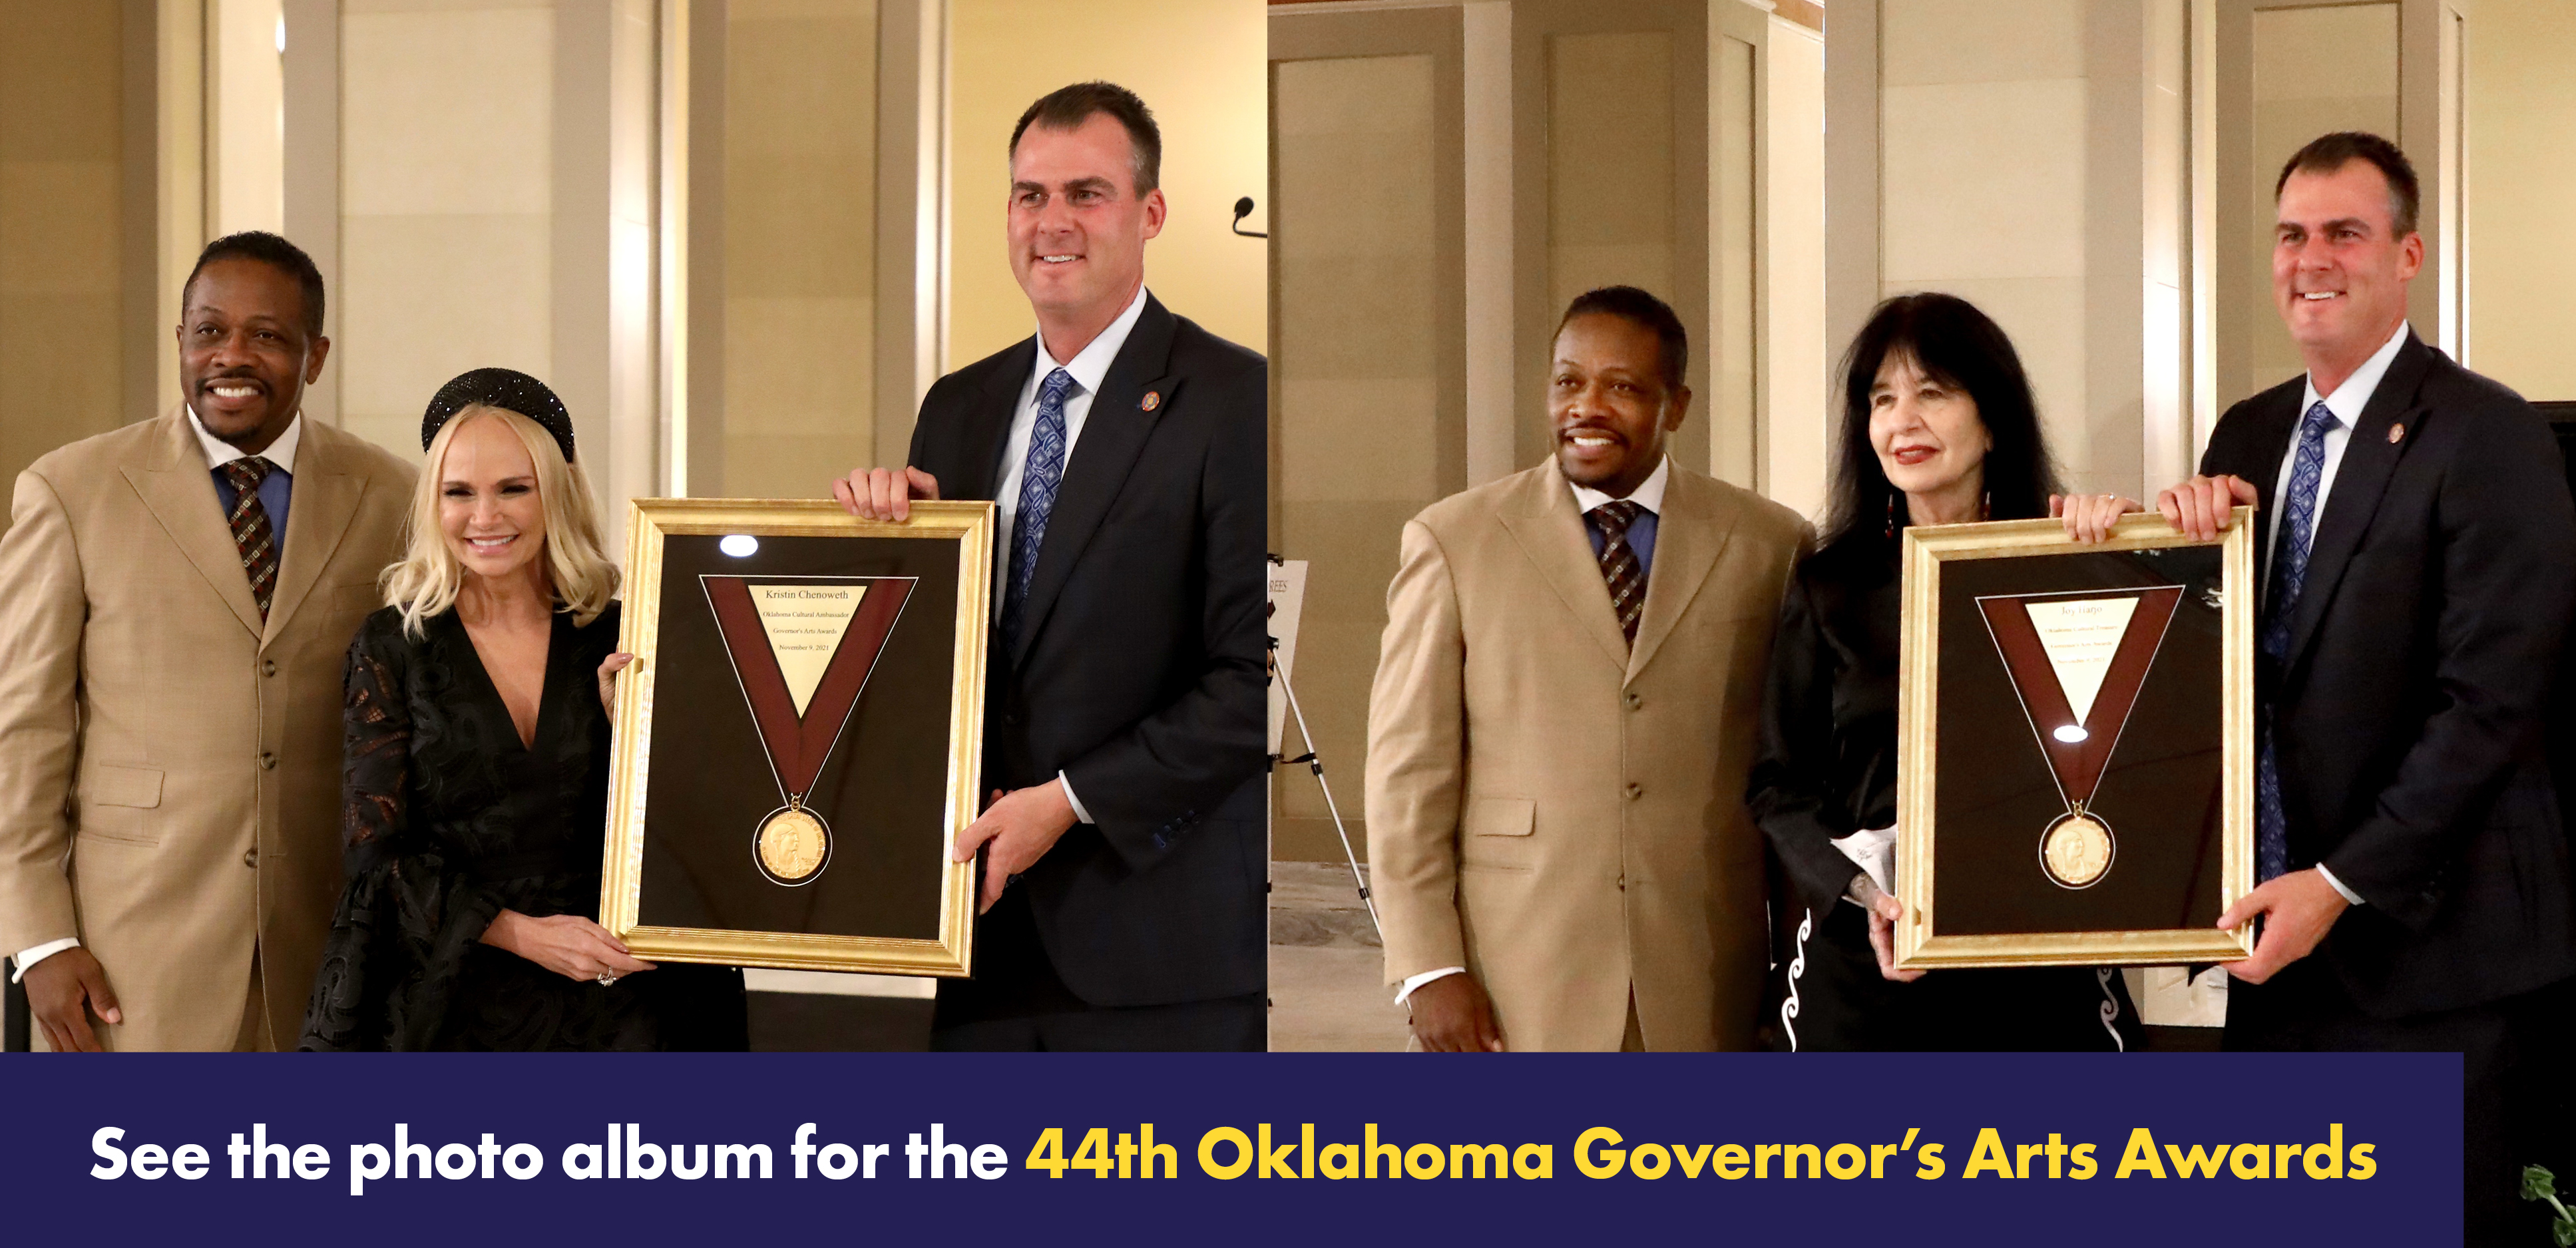 See the photo album for the 44th Oklahoma Governor’s Arts Awards